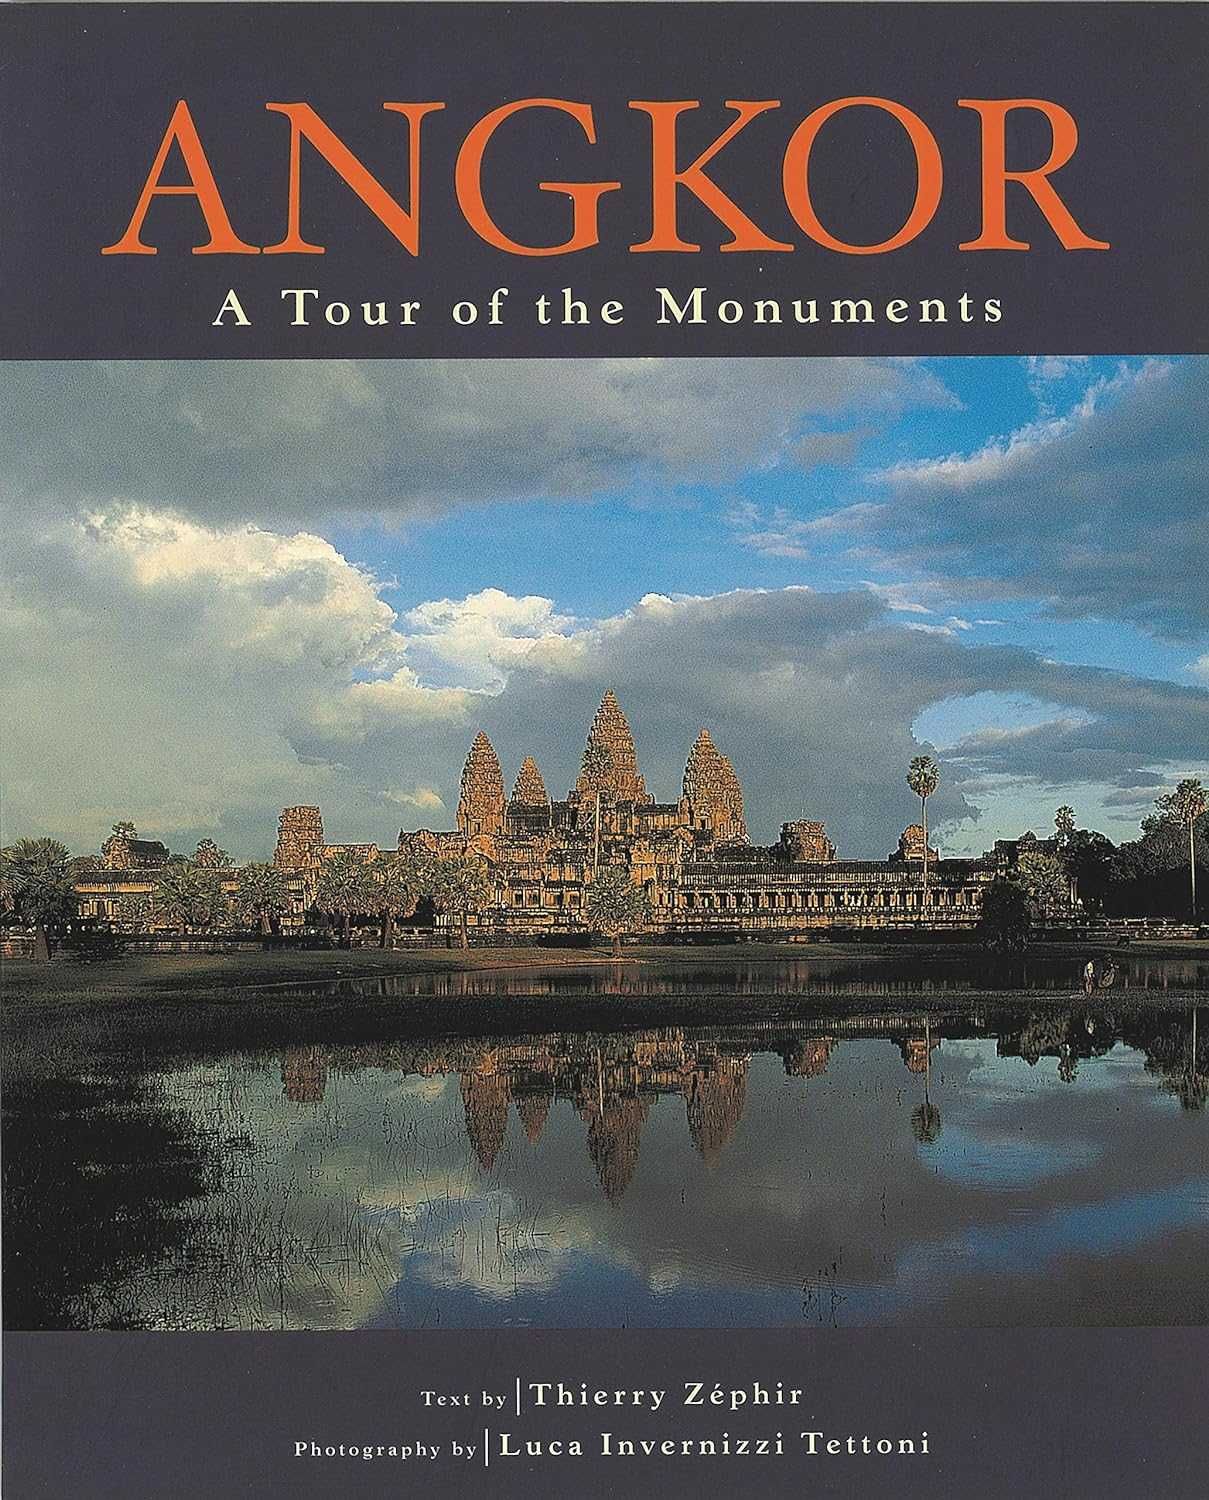 Livro “Angkor: A Tour of the Monuments” - 2004